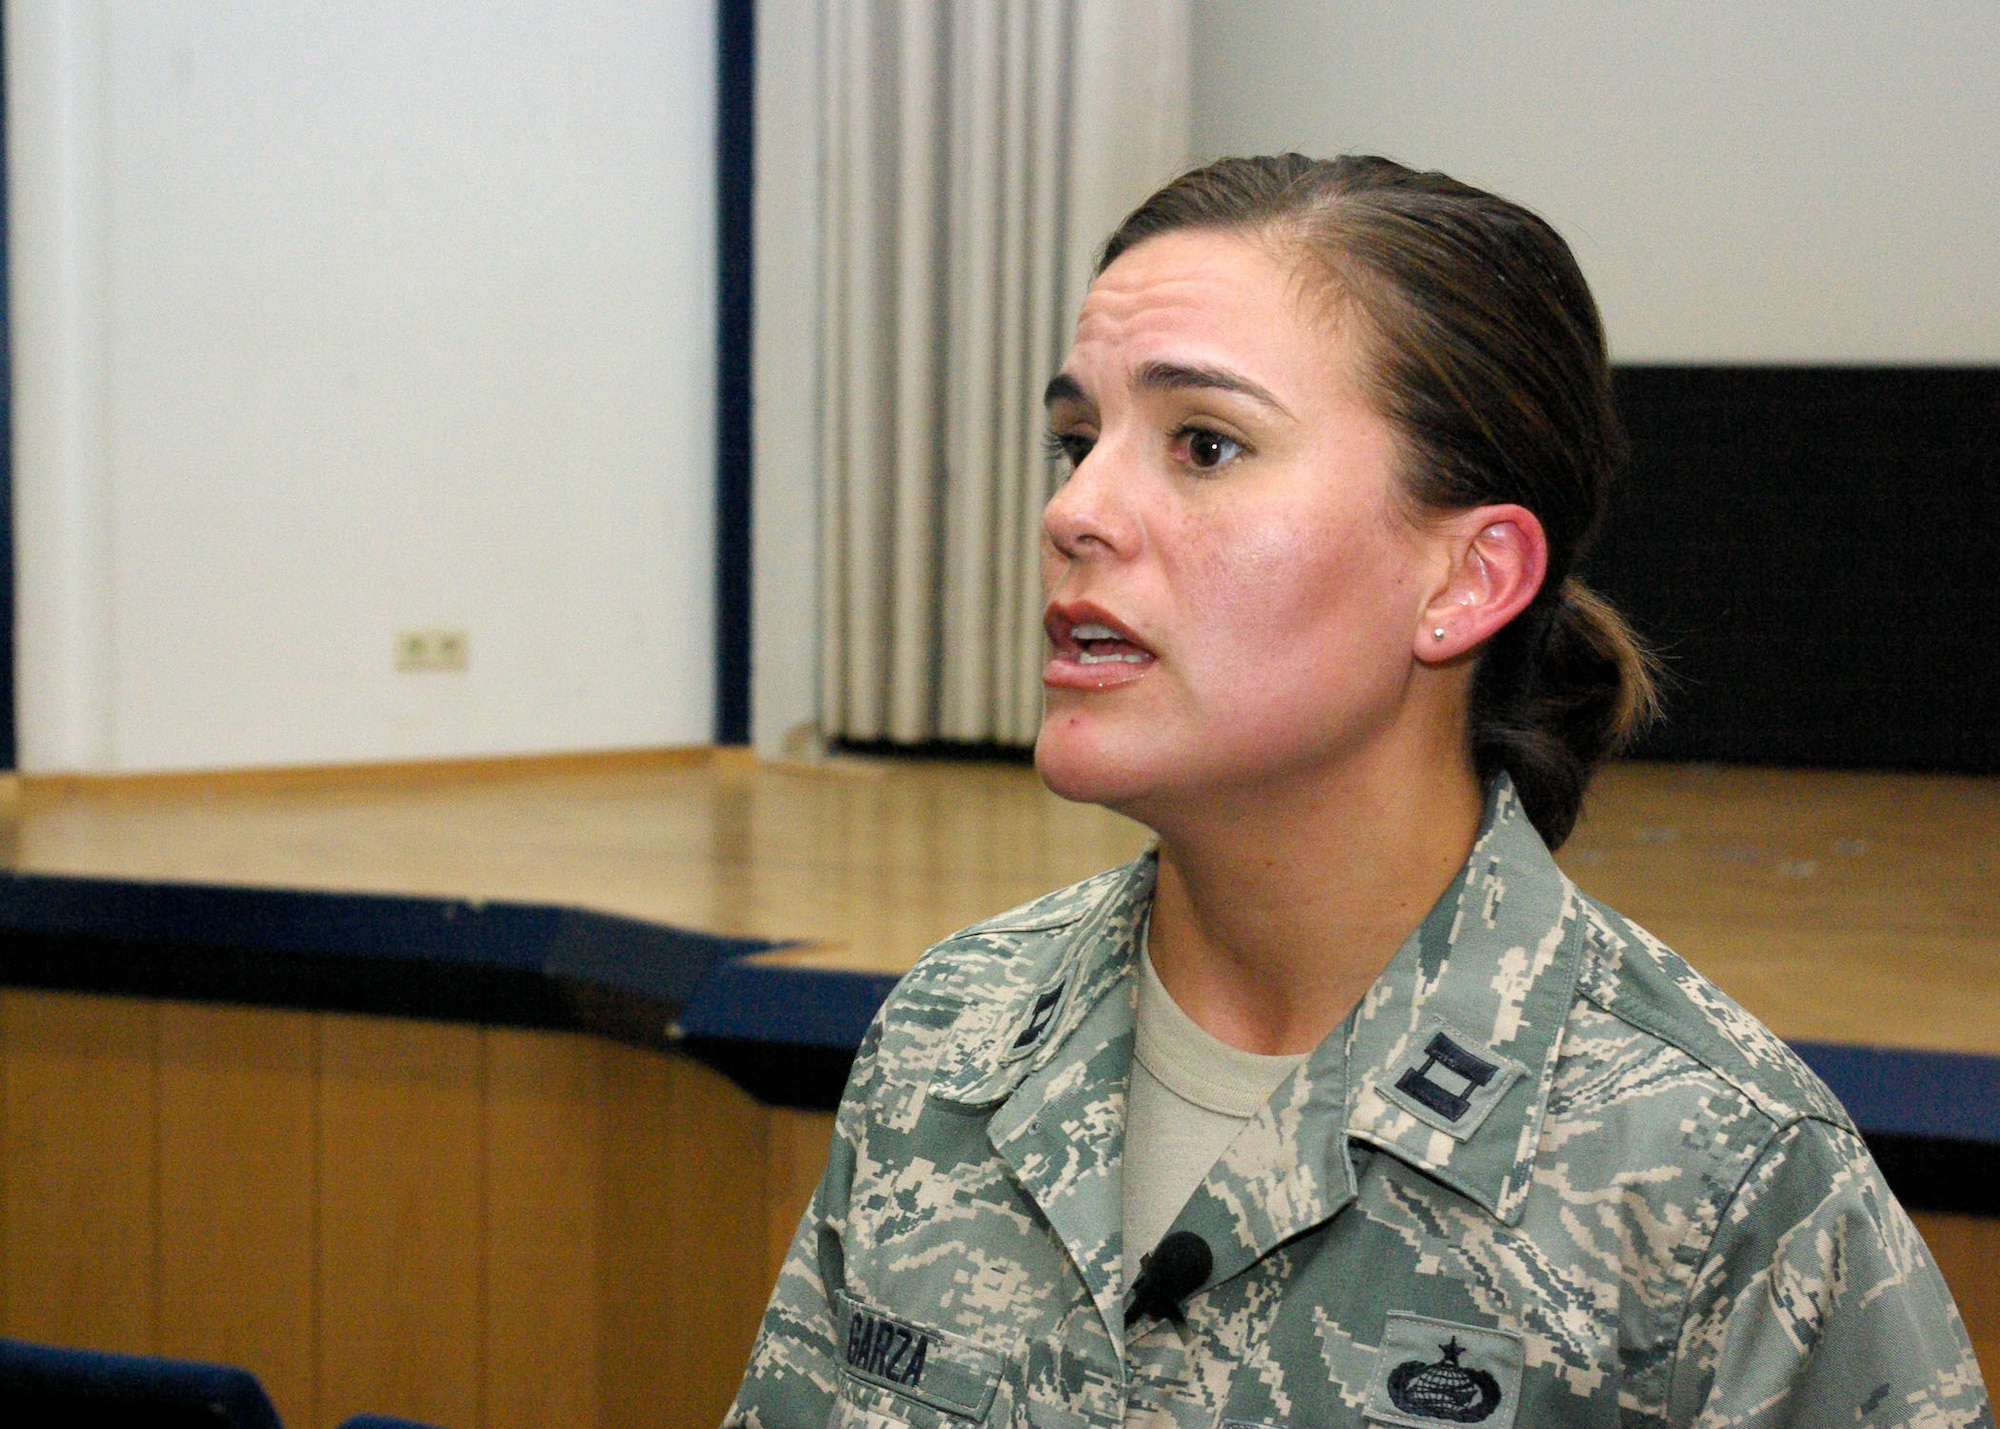 SPANGDAHLEM AIR BASE, Germany – Capt. Judy Garza, 52nd Military Personnel section chief, informs attendees of the Military Personnel Section stand-up briefing of the changes being implemented to Spangdahlem Air Base's administrative processes. (U.S. Air Force photo by Staff Sgt. Matthew S. Bright.)